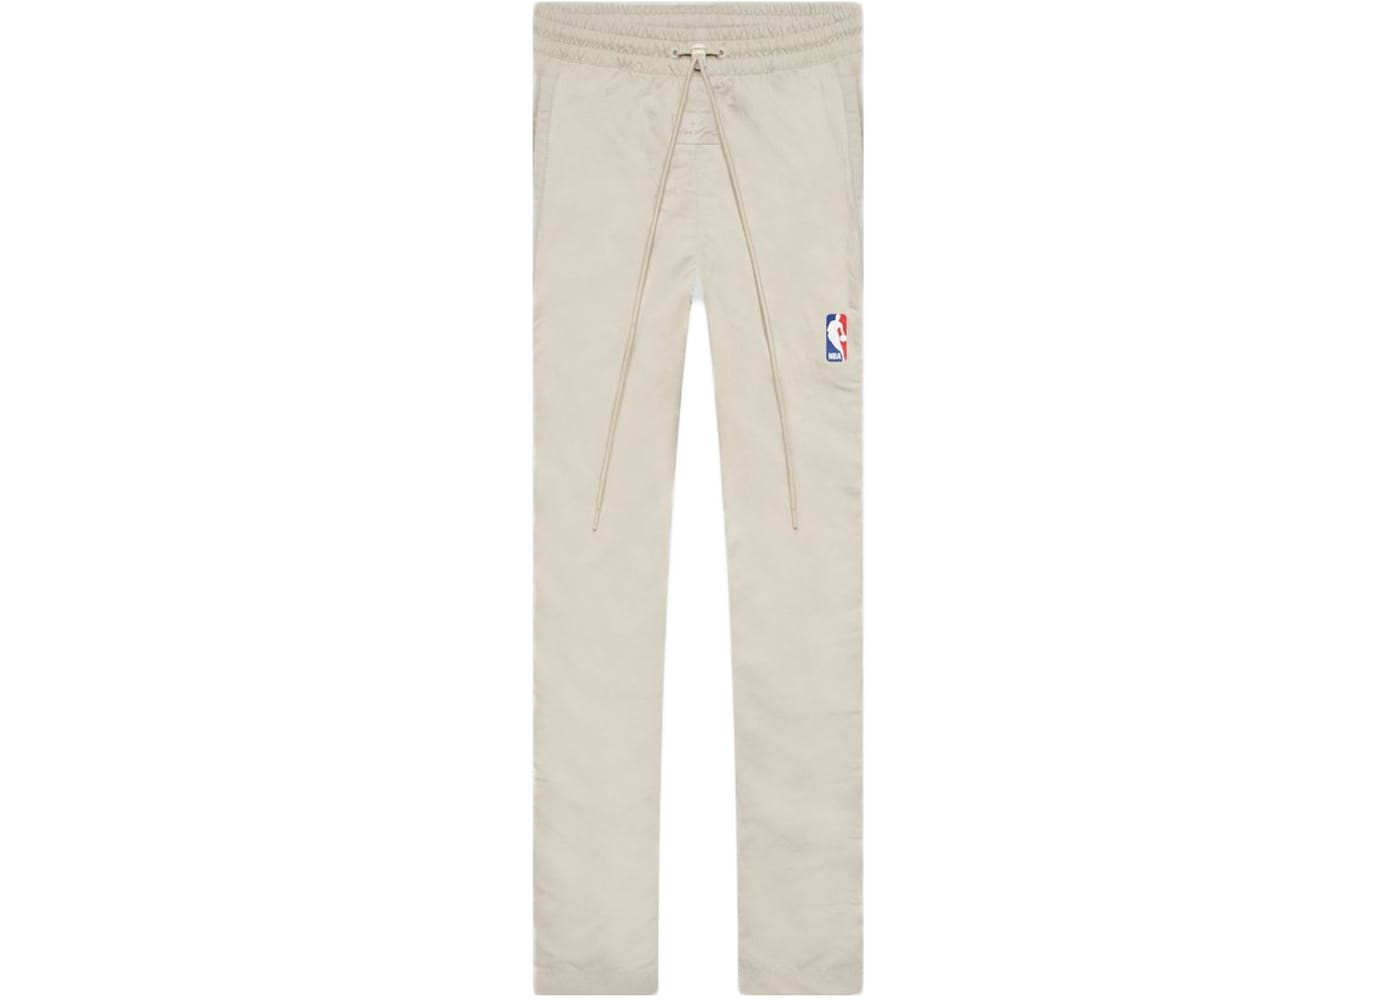 FEAR OF GOD X NIKE NYLON WARM UP PANTS STRING – ONE OF A KIND